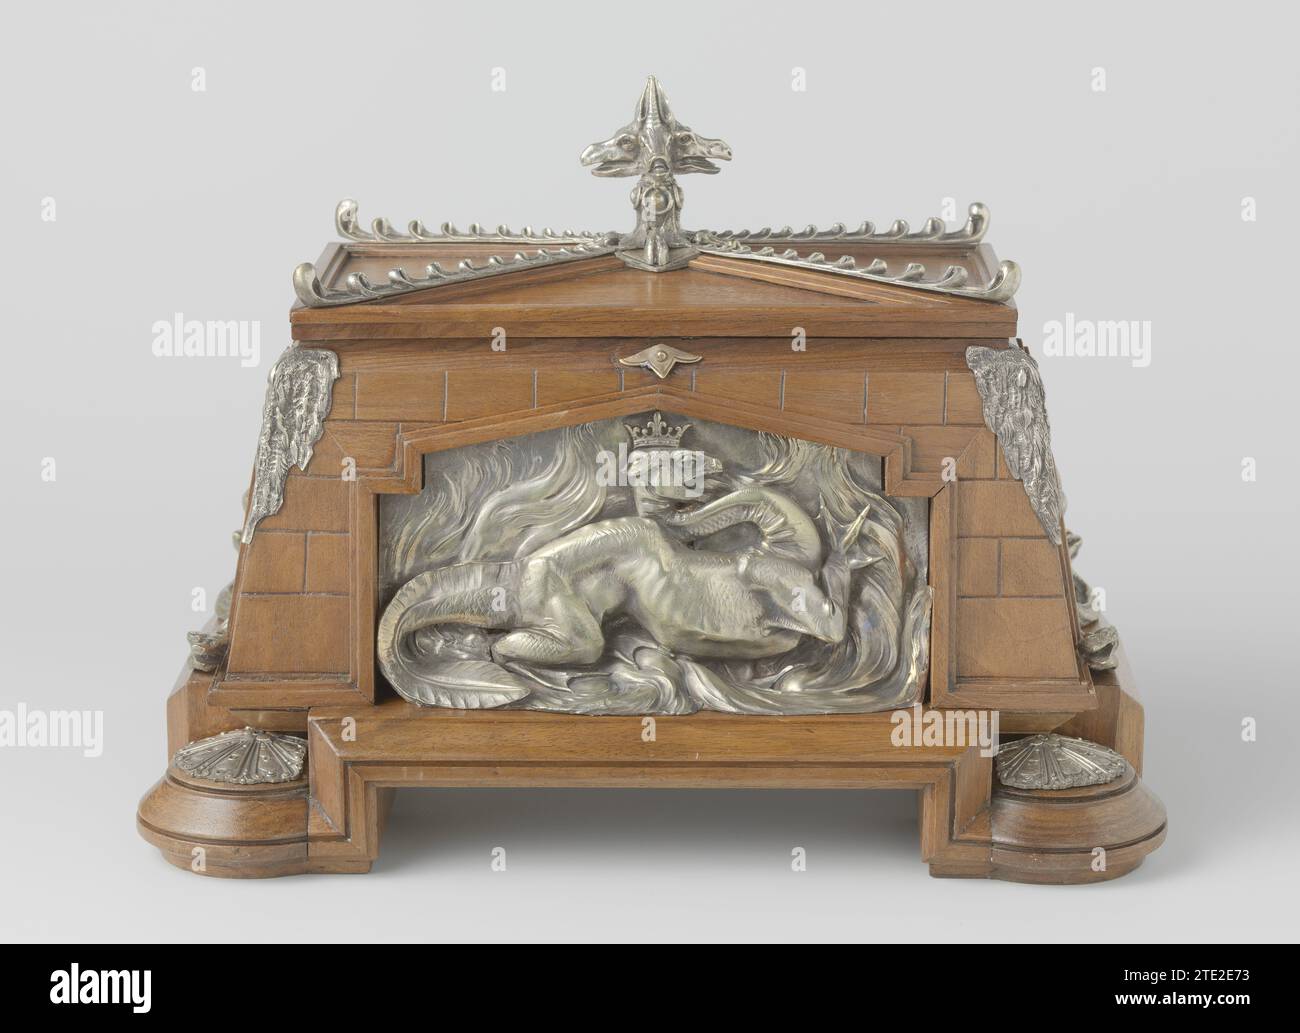 Cigar chest, Charles-Guillaume Diehl, c. 1867 - c. 1875 Cigar box in trapezium shape, which is fitted on four sides with silver -plated metal performances with fantasy dragons, snakes, and salamanders. The bottom edge shows a widening, which is provided with circles at the corners, with a silver -plated frame. The top is equipped with scalloped silver -plated details, which run over the lid in a cross. In the middle of this there is a button in the form of animal heads. Paris walnut (hardwood). cedar (wood). bronze (metal) casting Cigar box in trapezium shape, which is fitted on four sides wit Stock Photo